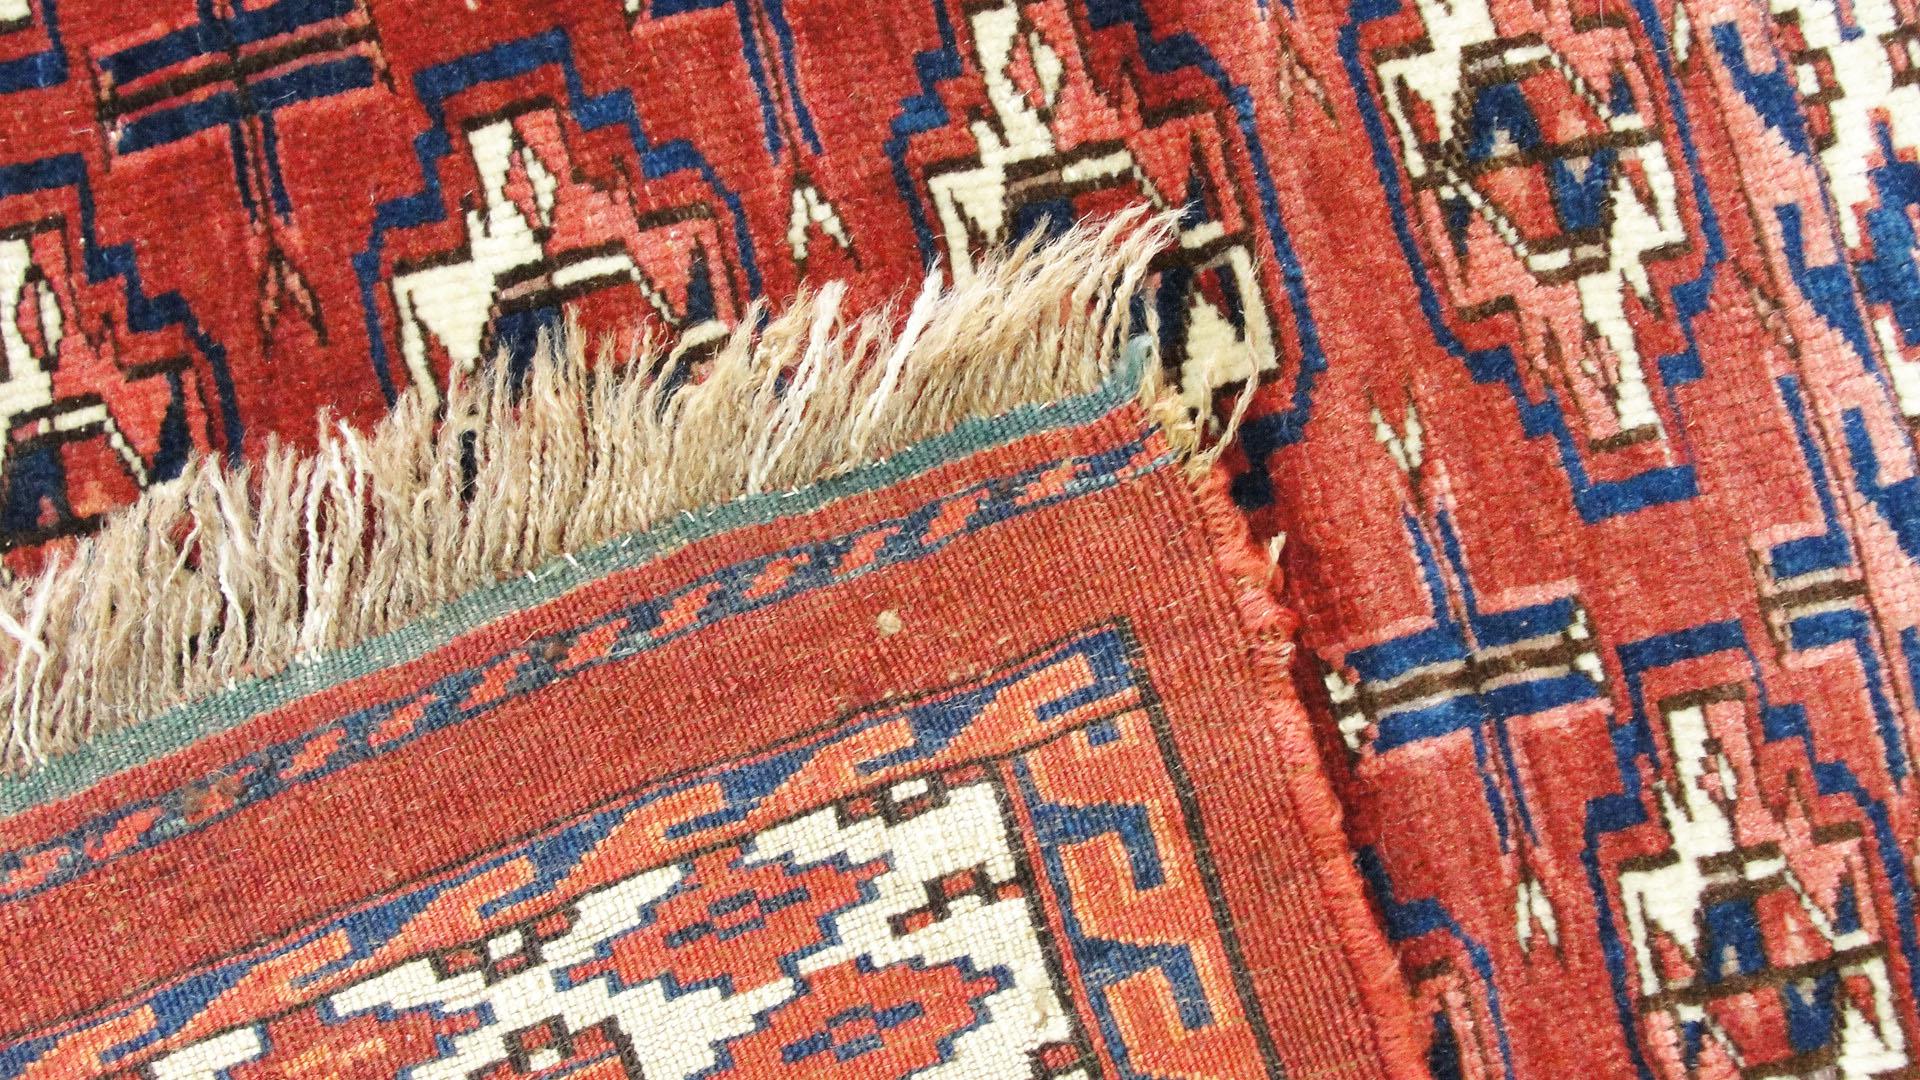 The Tekke are a nomadic group from central Asia north western Afghanistan and constantly at war in struggle for water and grazing for their herds.
The rug is showing a far greater degree of design gulls and ornamentation and color variation.